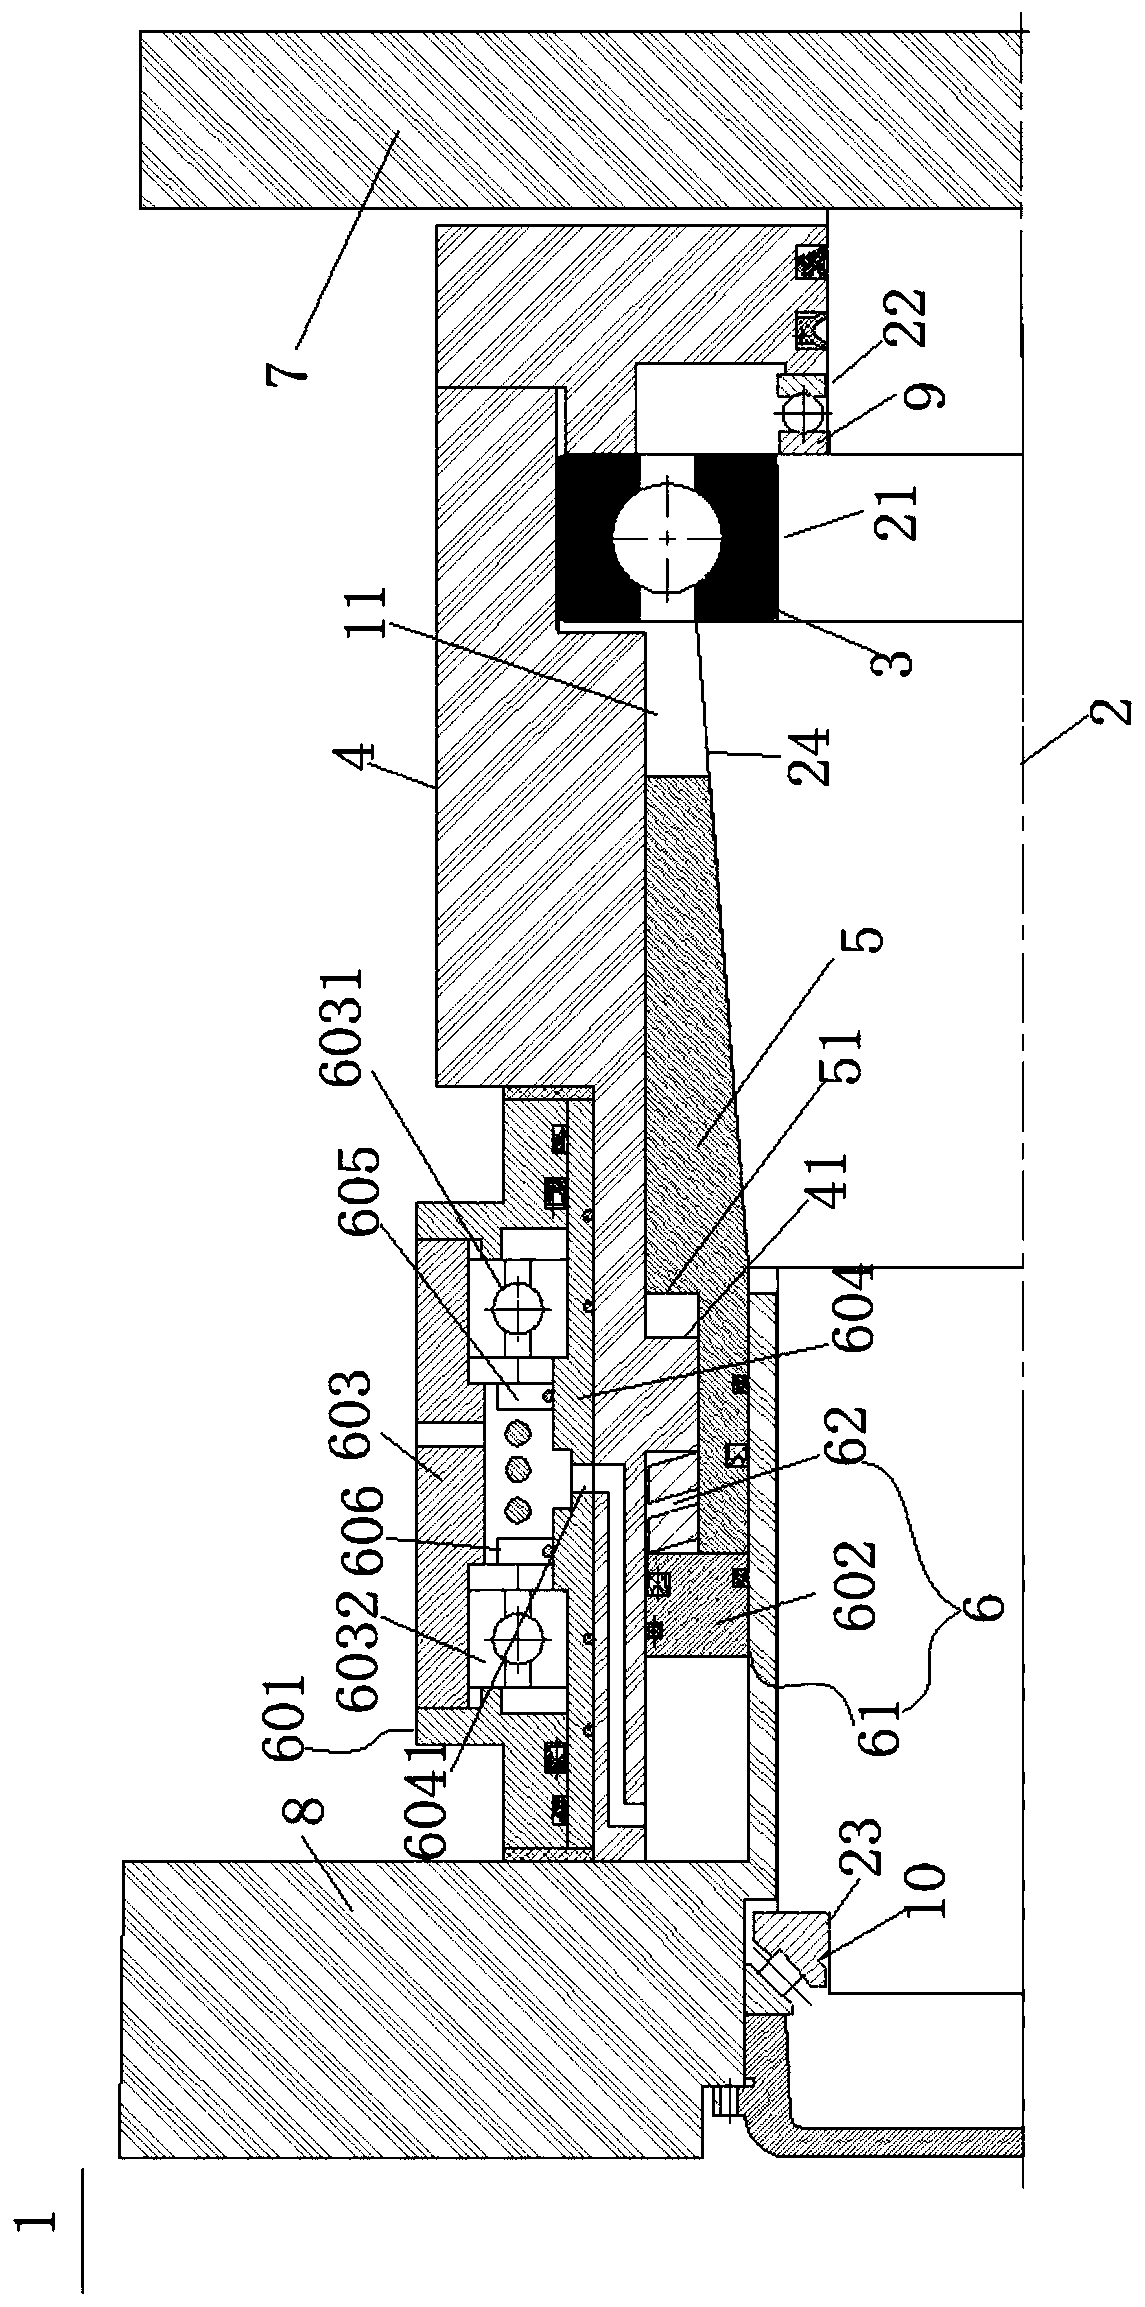 Coupling device capable of achieving online separation and joint